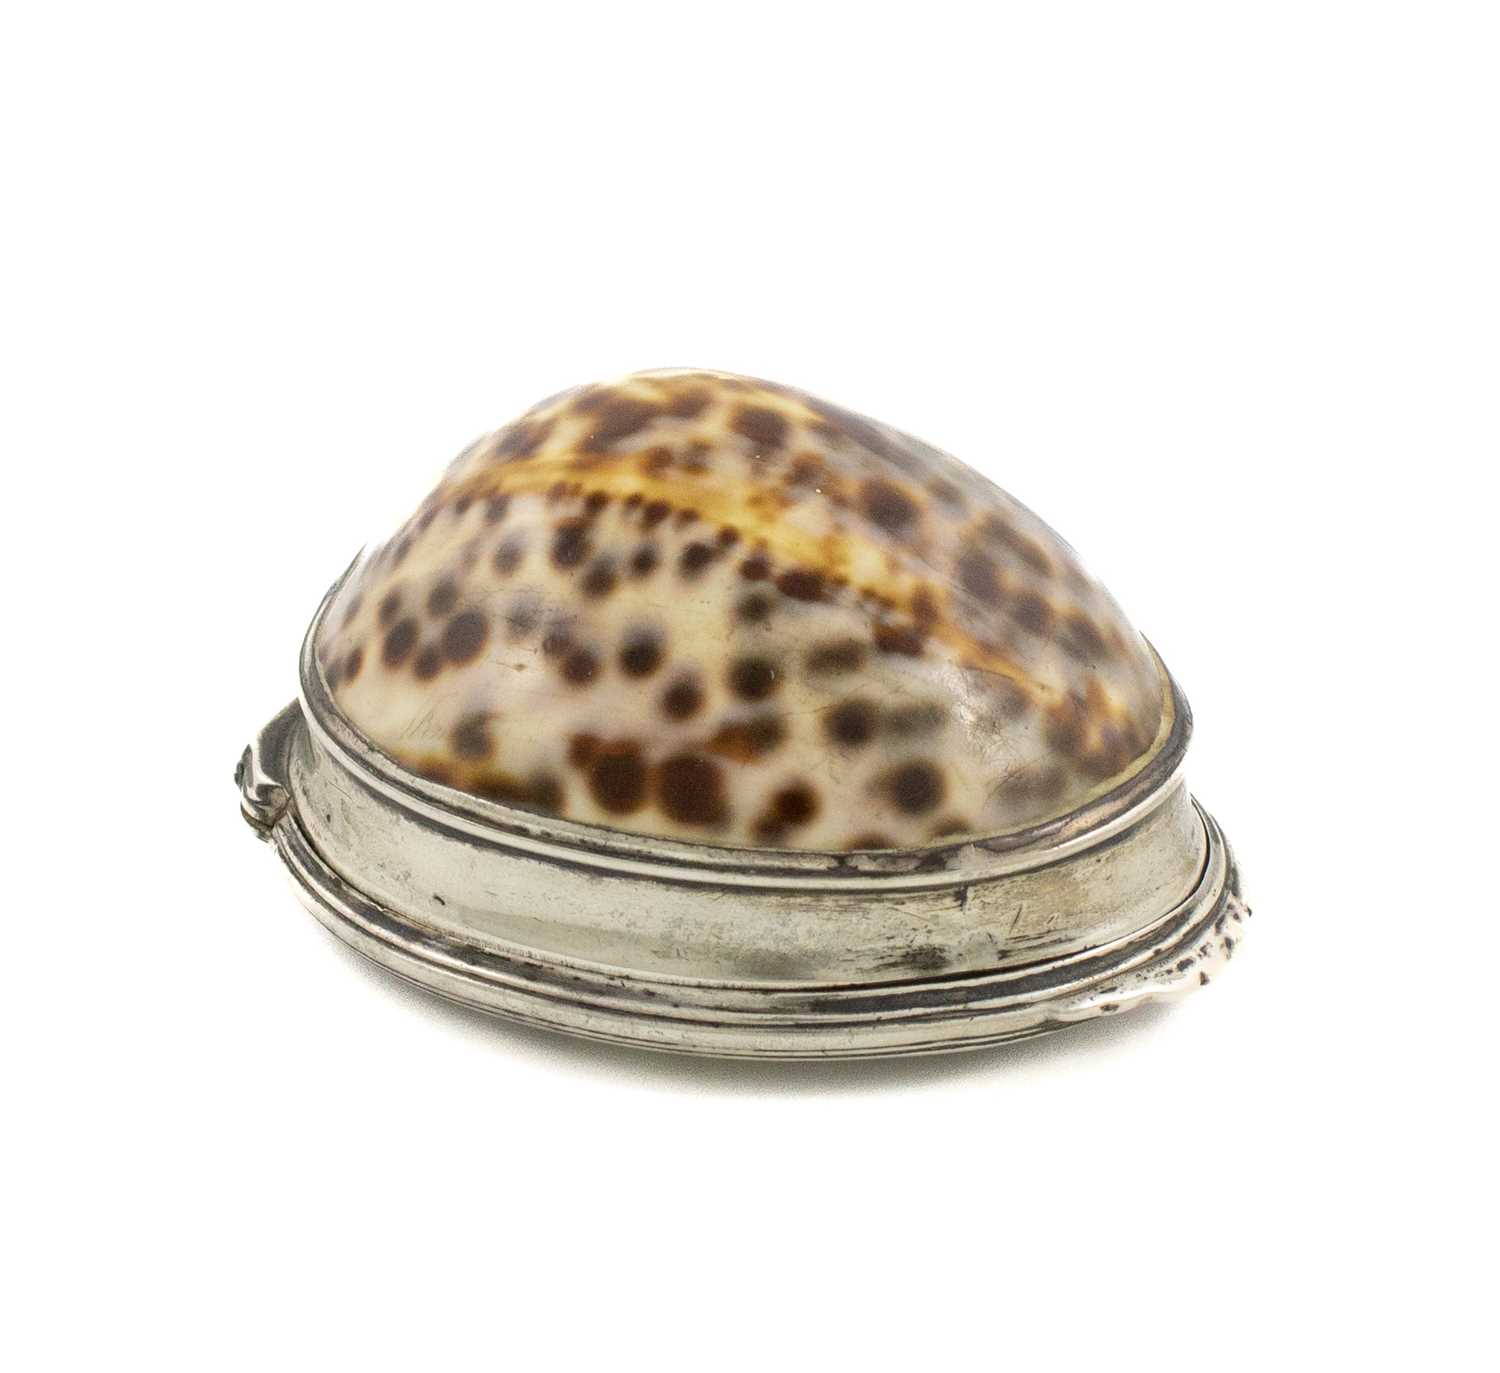 A George II silver-mounted cowrie shell snuff box, by Robert Collier or Robert Cox, London circa